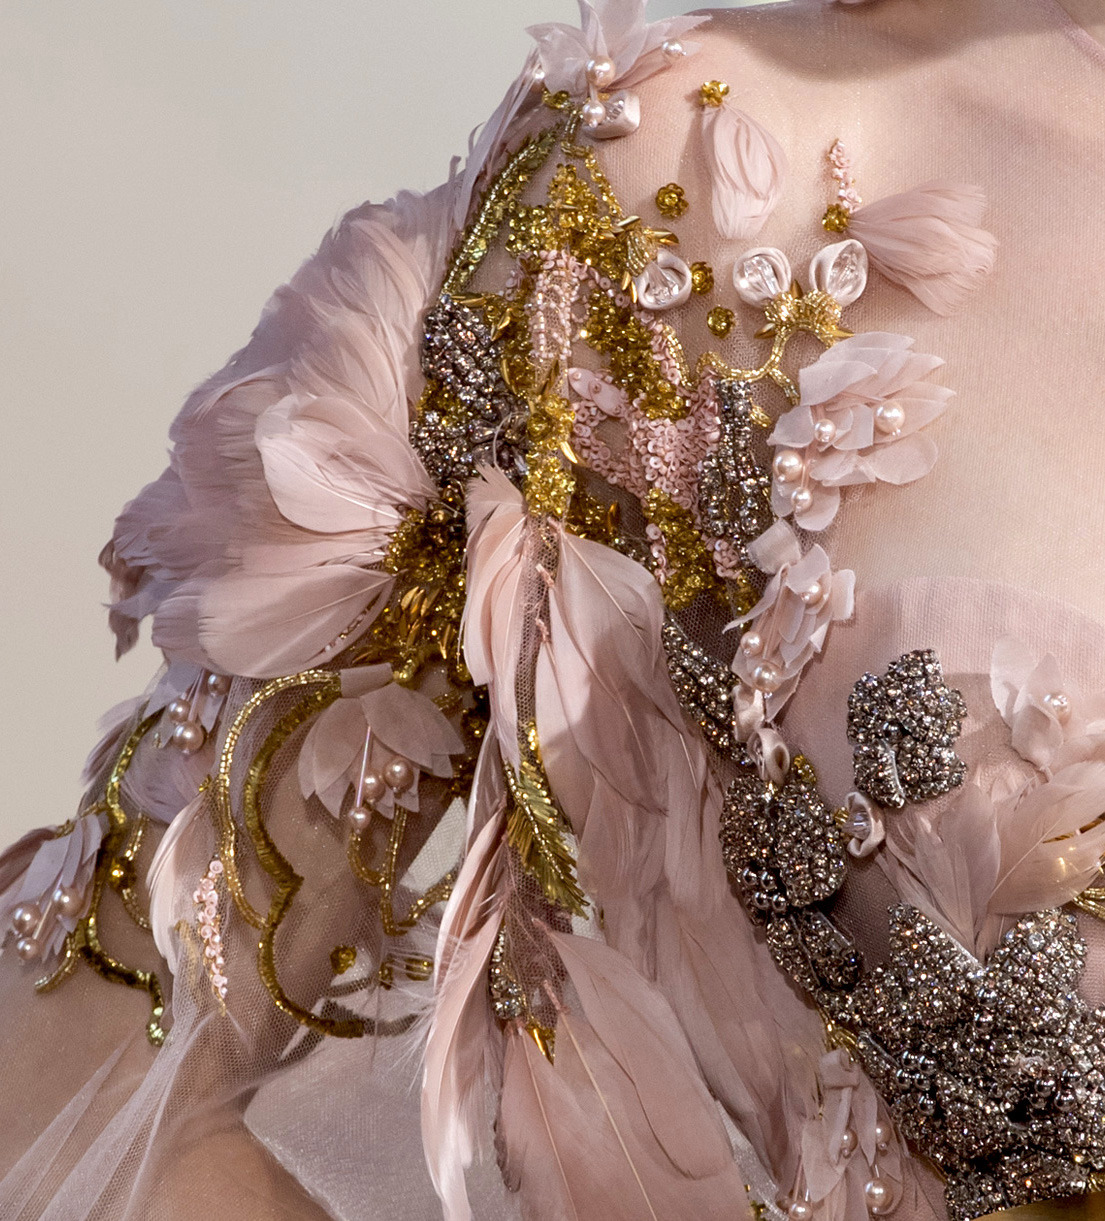 The Makeup Brush — Elie Saab F/W 2019 Couture